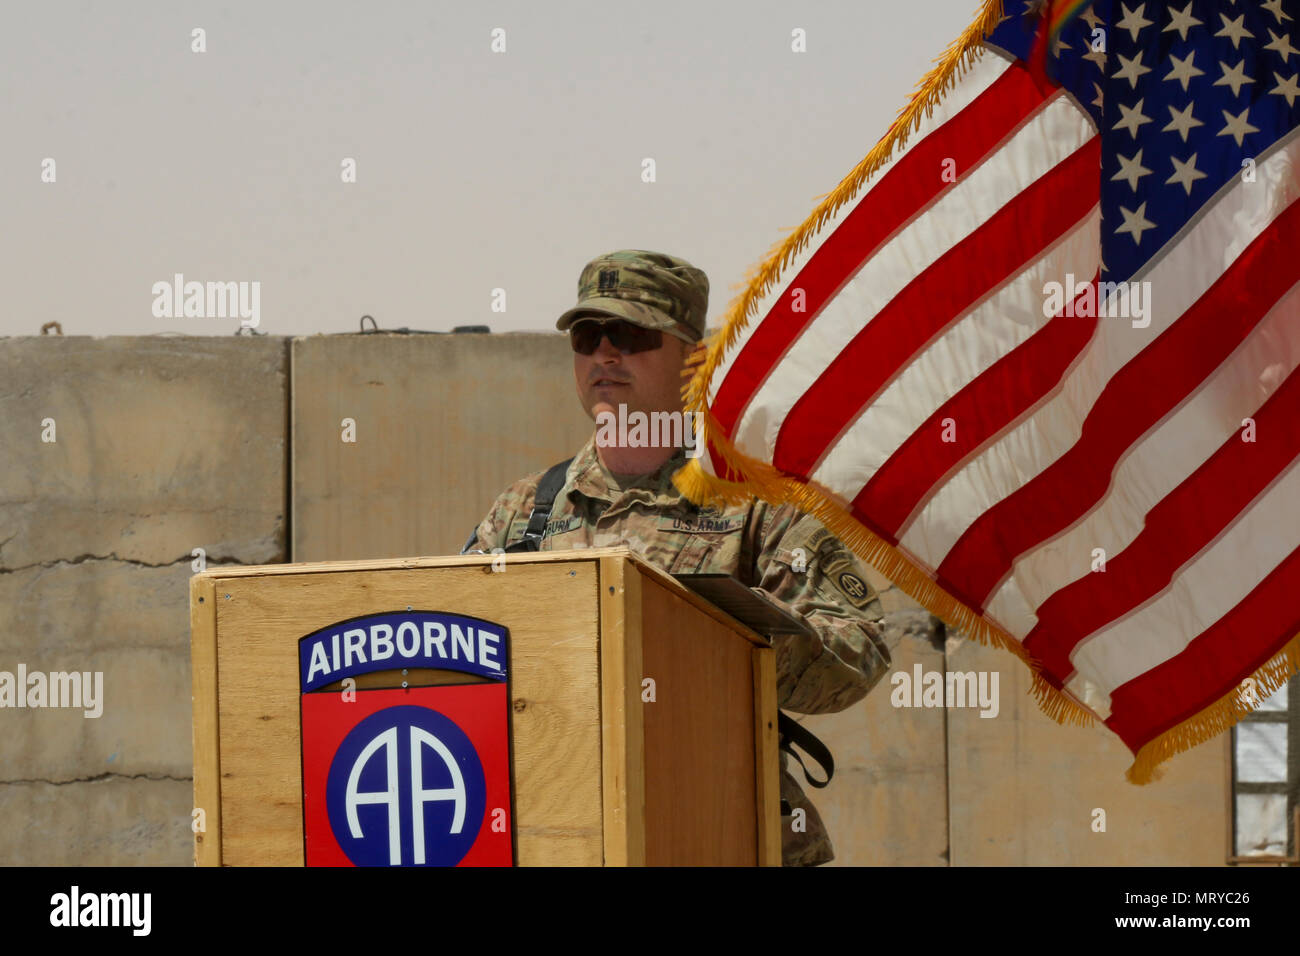 U.S. Army Capt. Scott Rayburn, commander of Alpha Company, 37th Engineer Battalion, 2nd Brigade Combat Team, 82nd Airborne Division, addresses those in attendance, especially his sister, U.S. Army Capt. Kaitlin Whitmore, commander of Charlie Company, 215th Brigade Support Battalion, 3rd Armored Brigade Combat Team, 1st Cavalry Division, during his first-ever change-of-command ceremony at Qayyarah West Airfield, Iraq, July 1, 2017. (U.S. Army photo by Staff Sgt. Leah R. Kilpatrick) Stock Photo